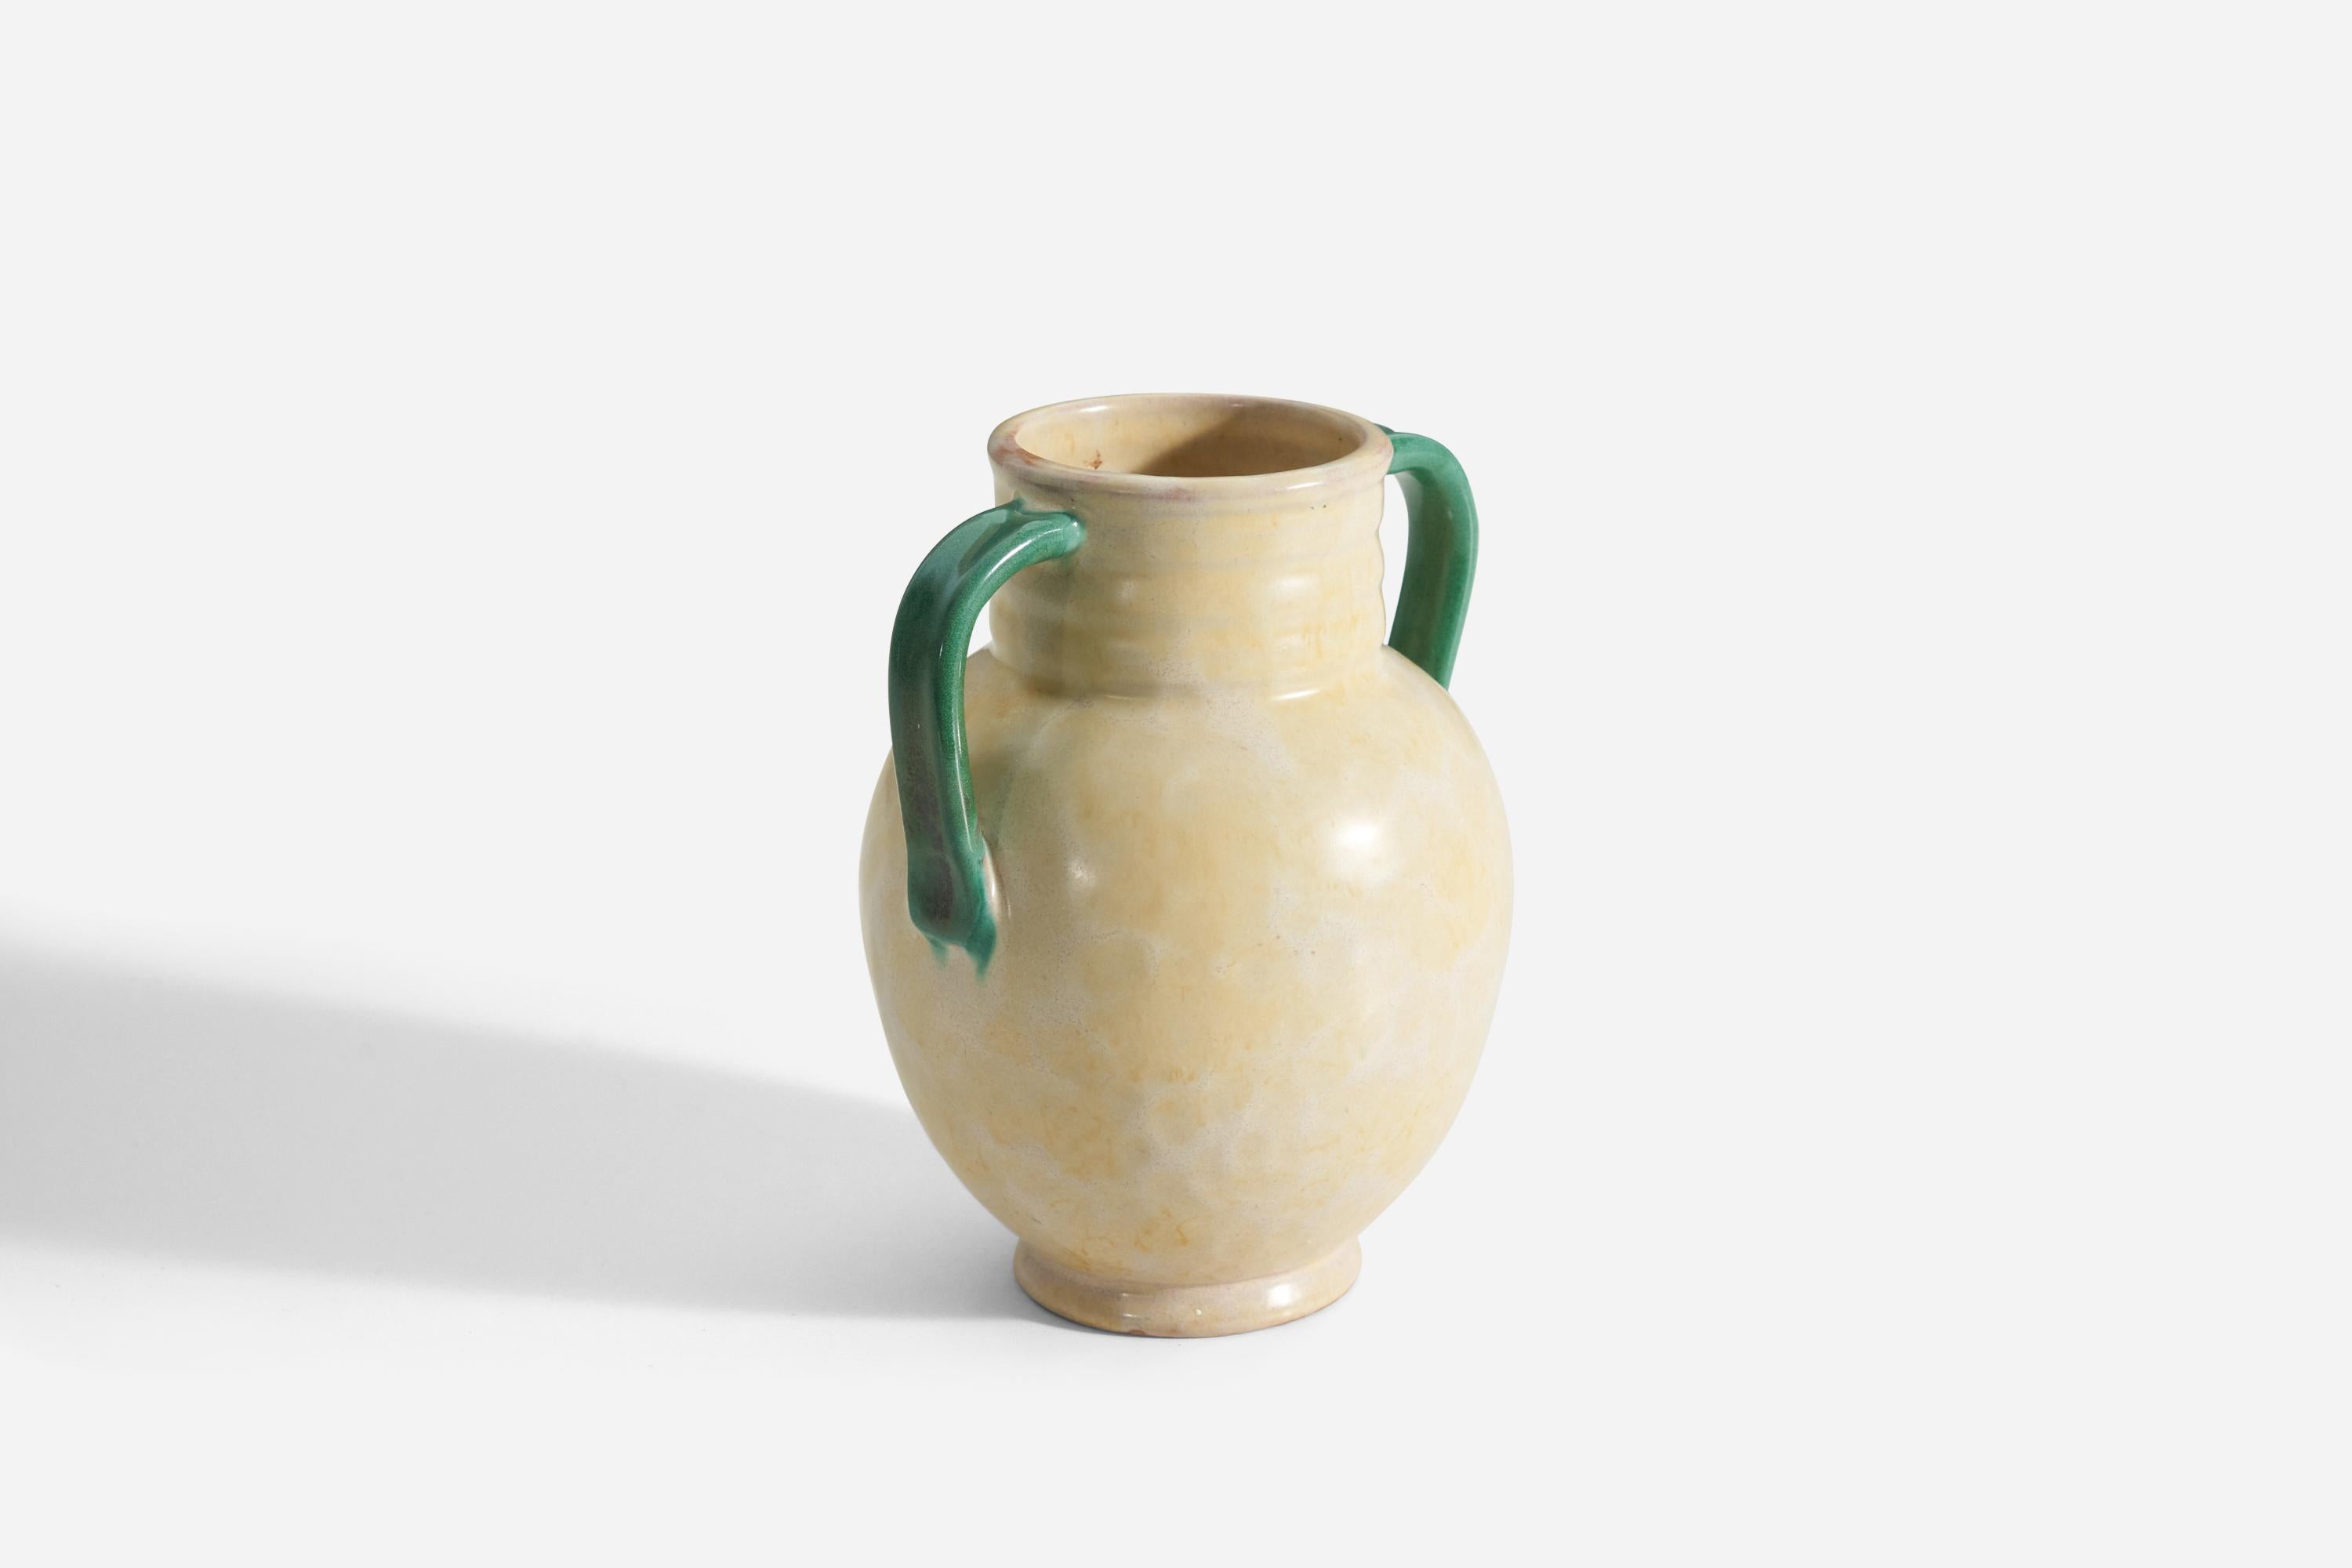 A yellow and green earthenware vase Produced by Upsala-Ekeby, Sweden, 1940s. 

